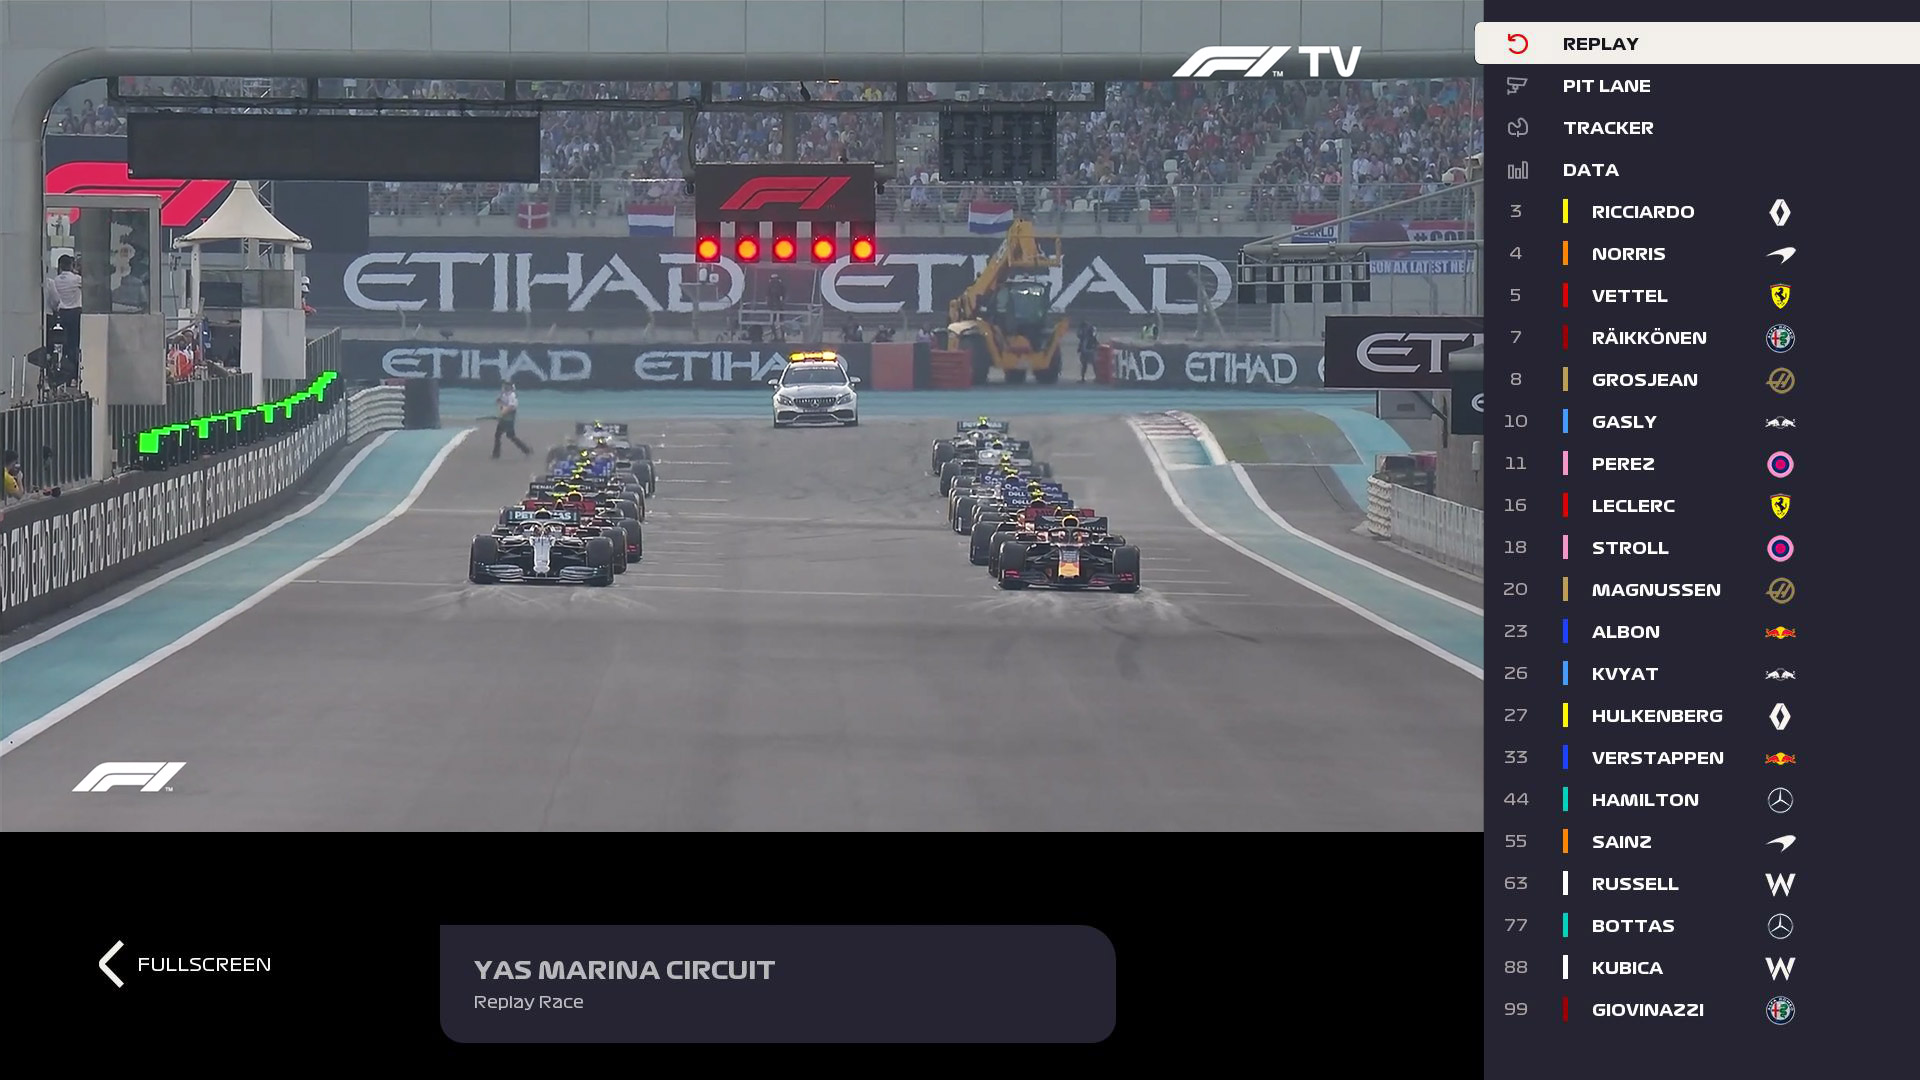 F1 Tv Is Now Available On Roku Devices Roku